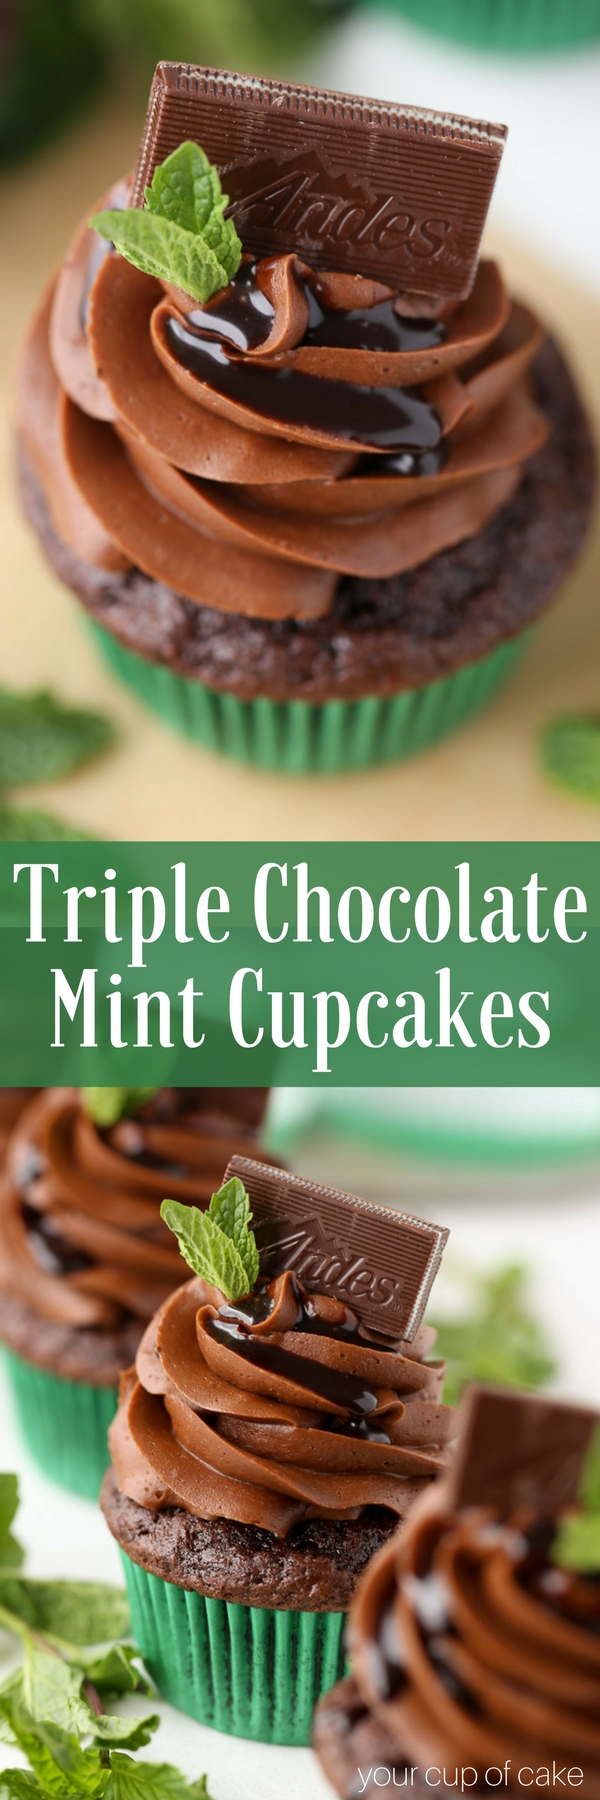 Triple Chocolate Mint Cupcakes with Andes Mints! This recipe is super easy and quick to make! 